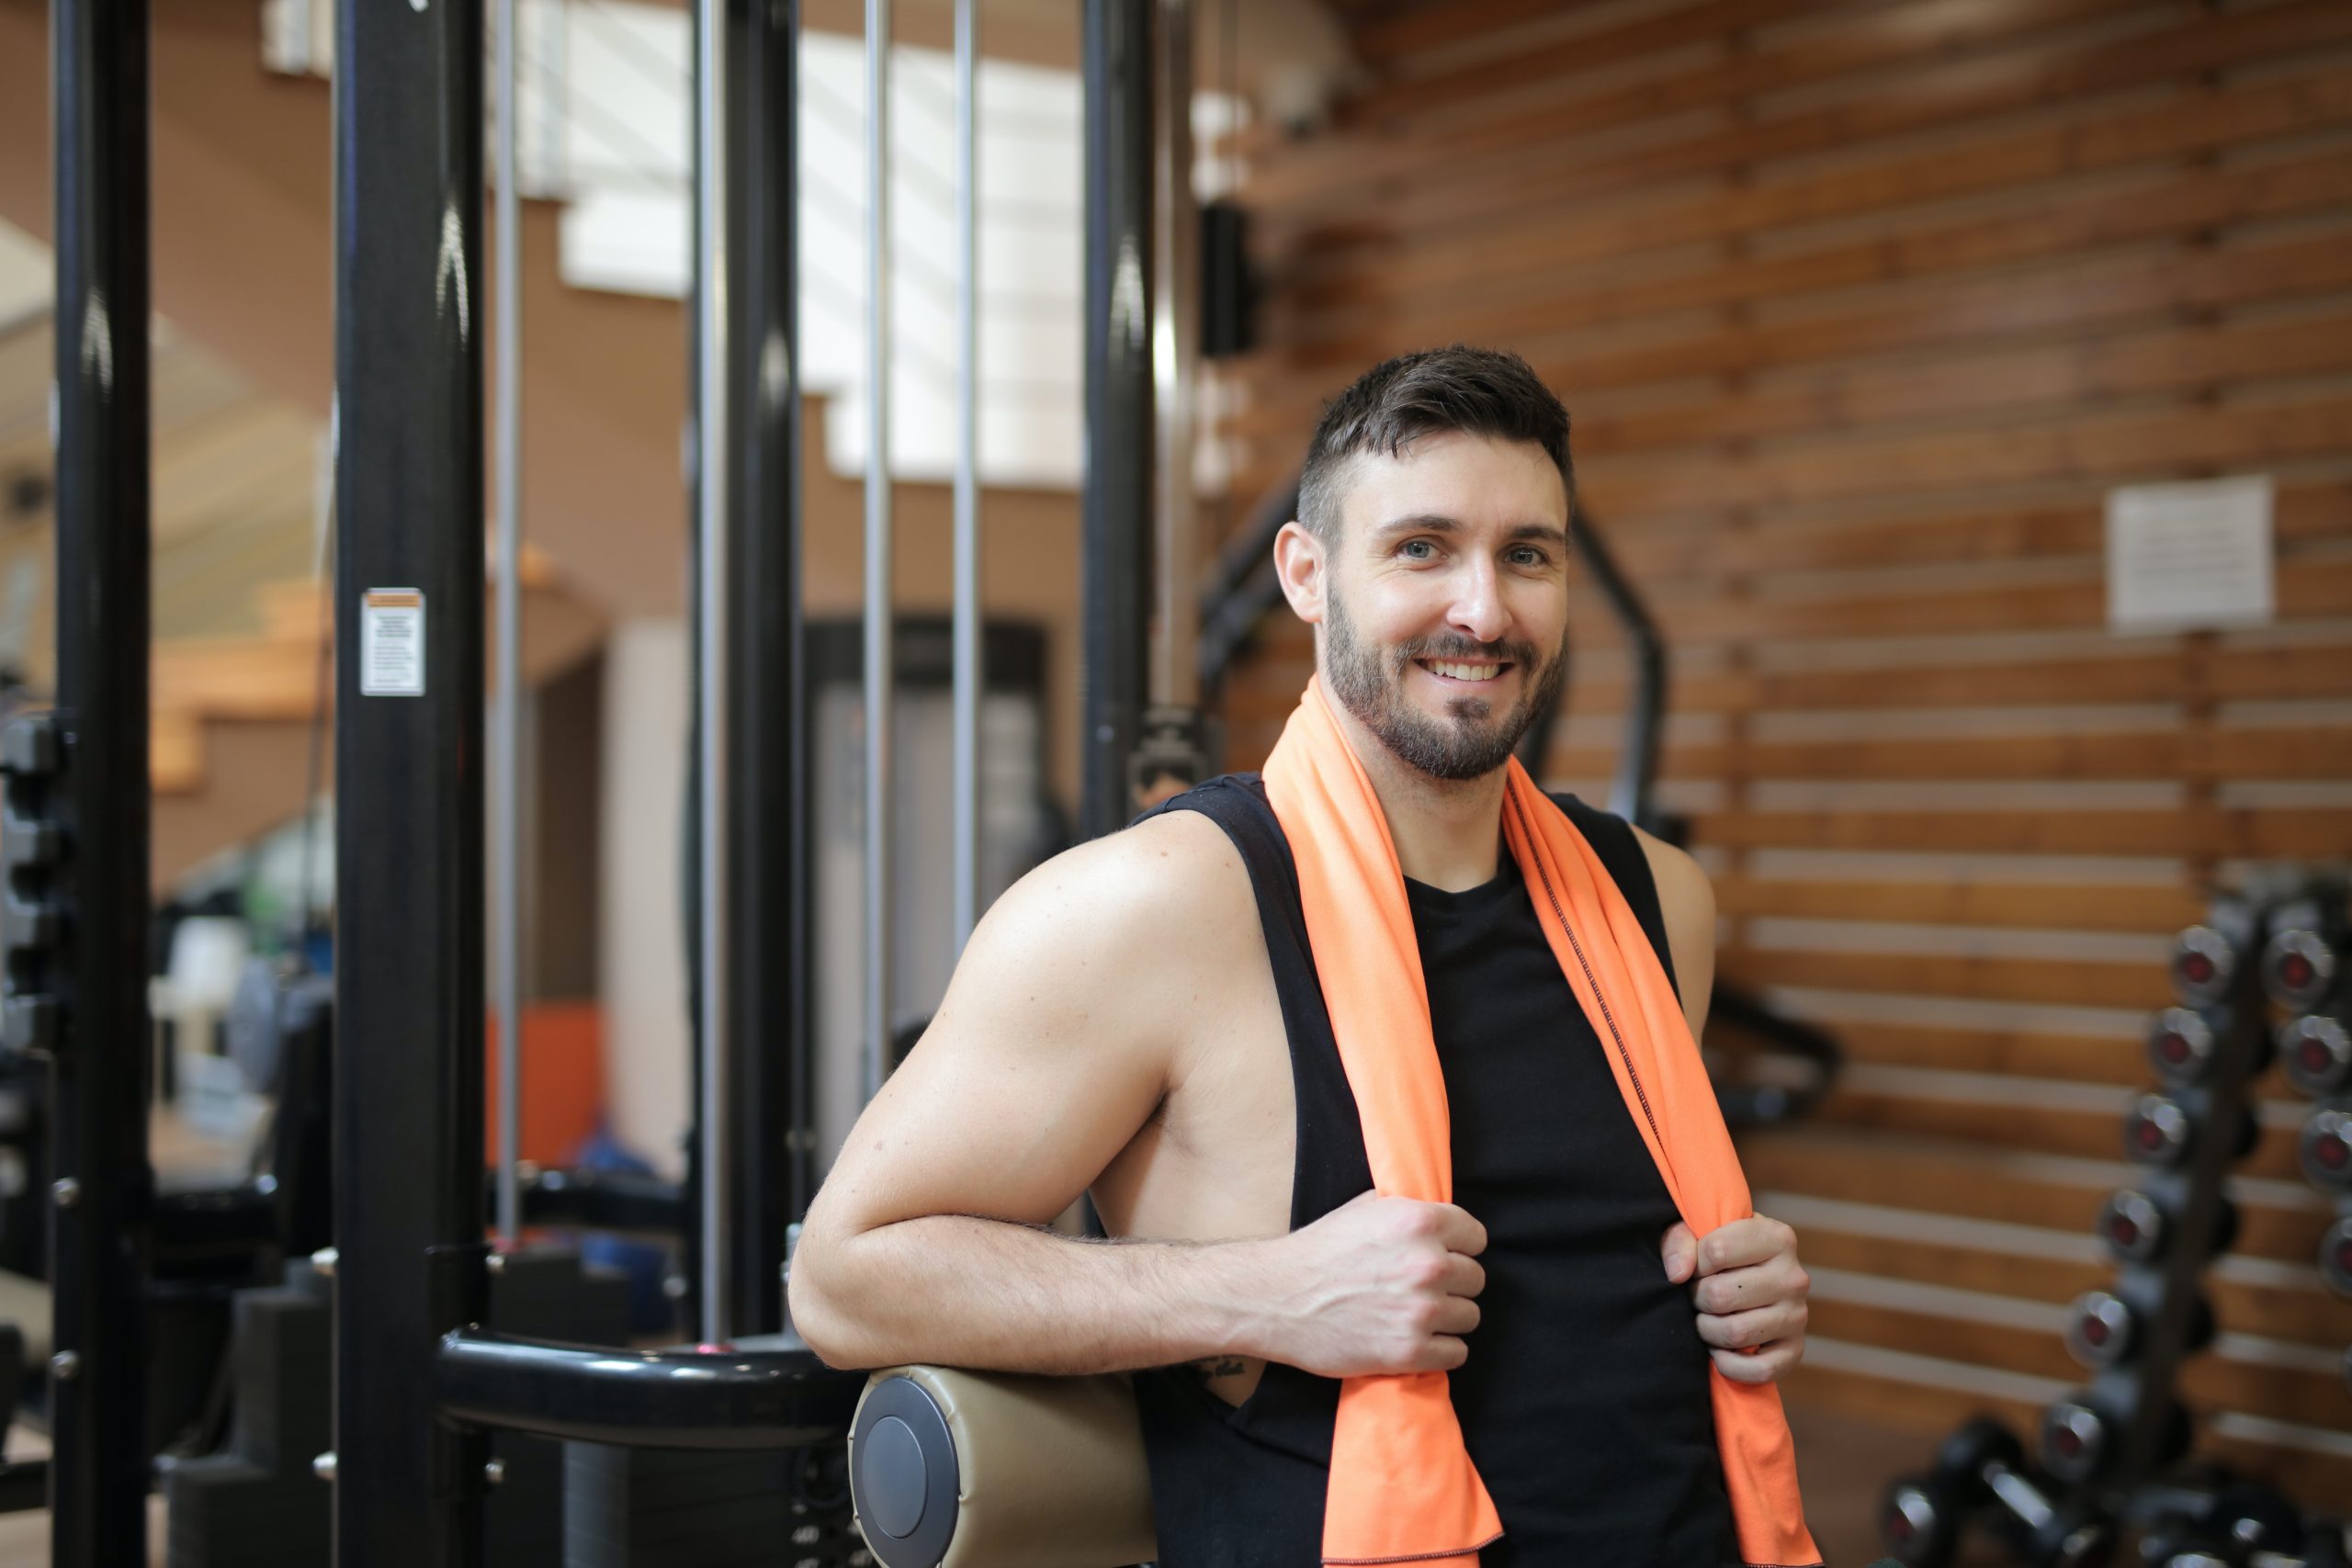 There are many fascinating facts about men's health, especially in relation to cardiovascular disease. In this image, a man at the gym is smiling at the camera while holding a towel behind his neck.